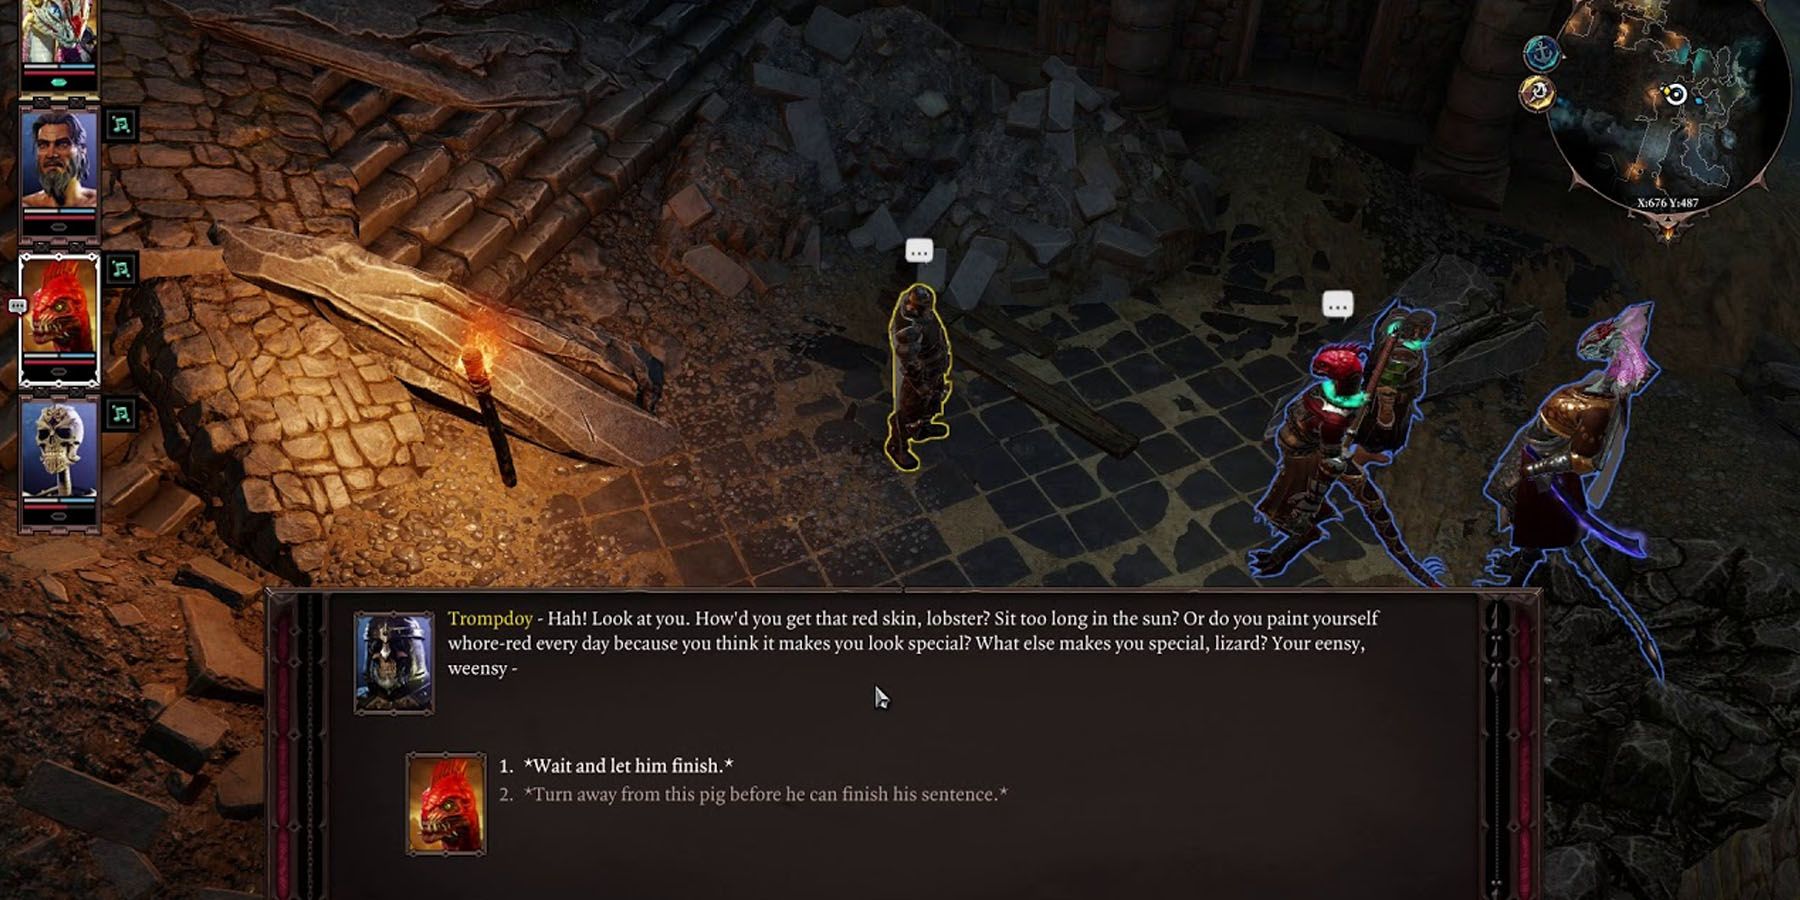 Dialogue options in DOS2